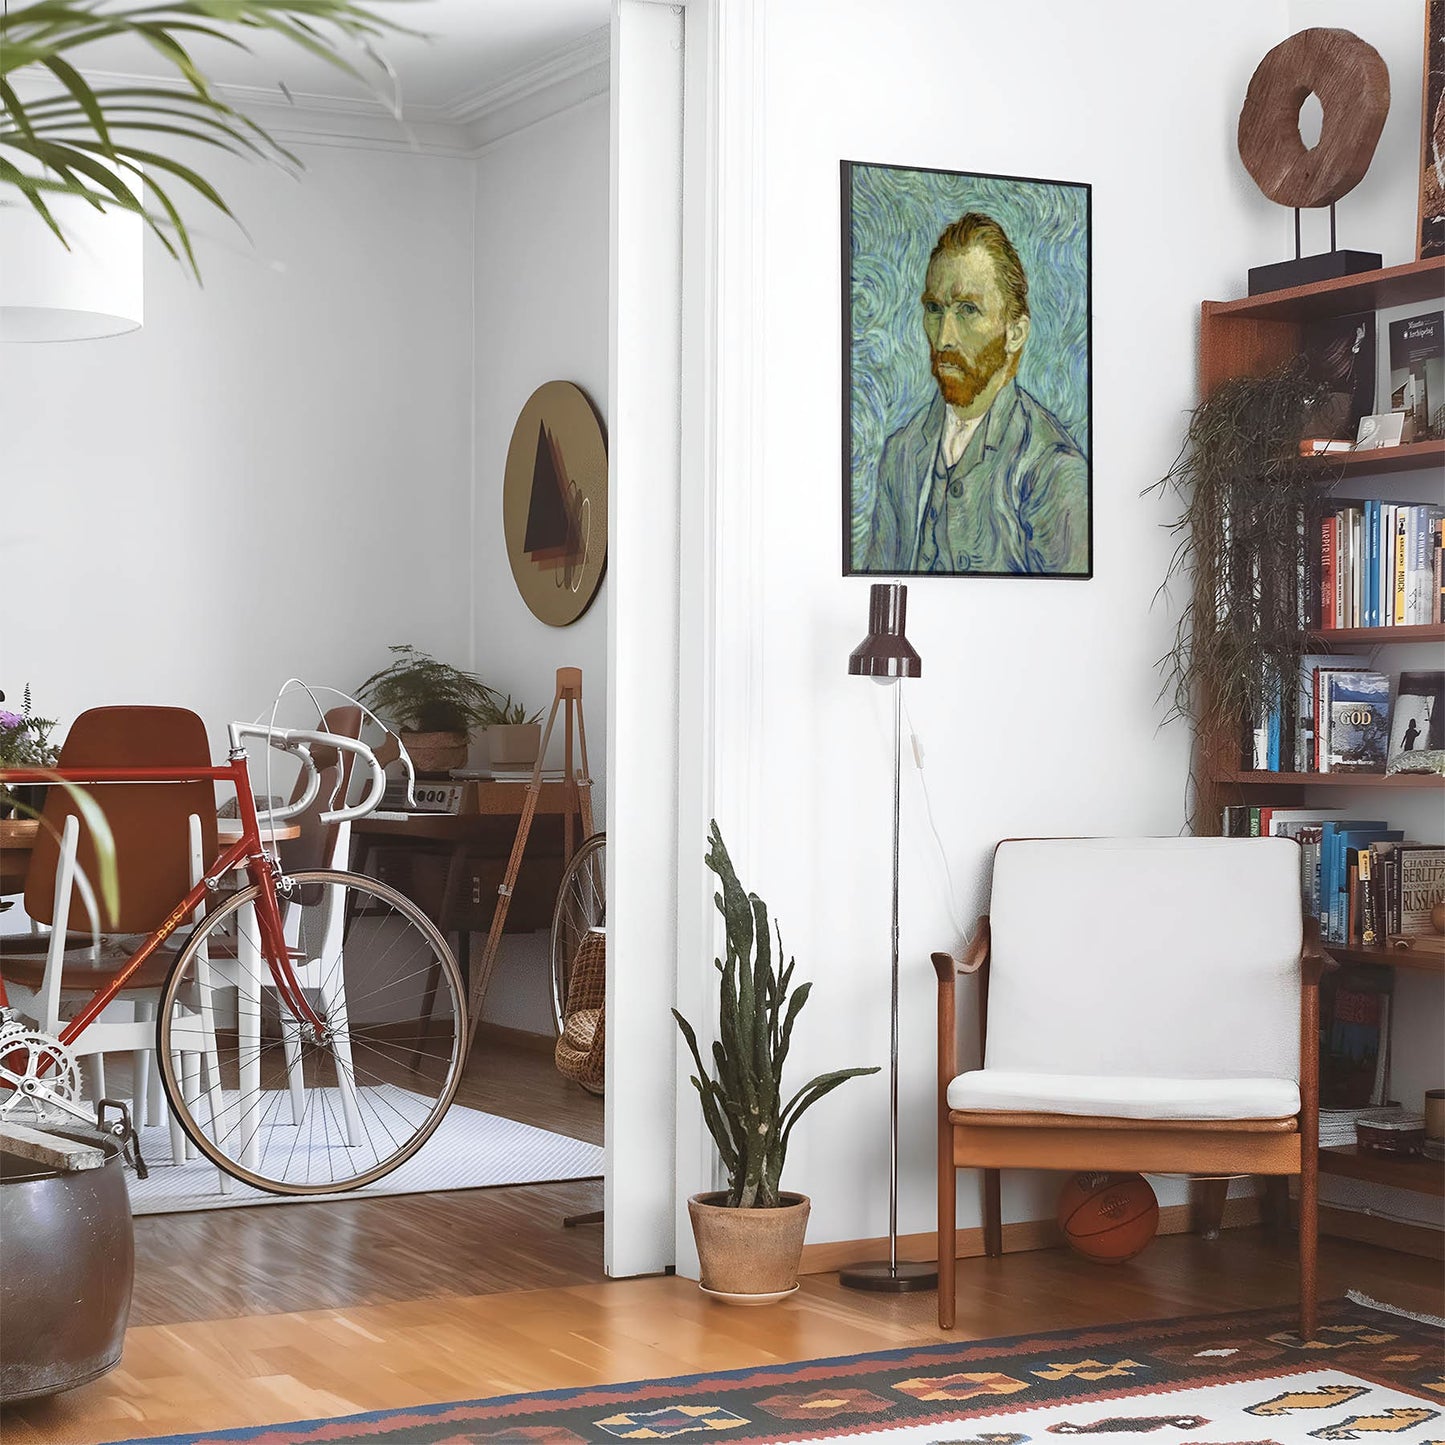 Eclectic living room with a road bike, bookshelf and house plants that features framed artwork of a Colorful and Trippy van Gogh above a chair and lamp